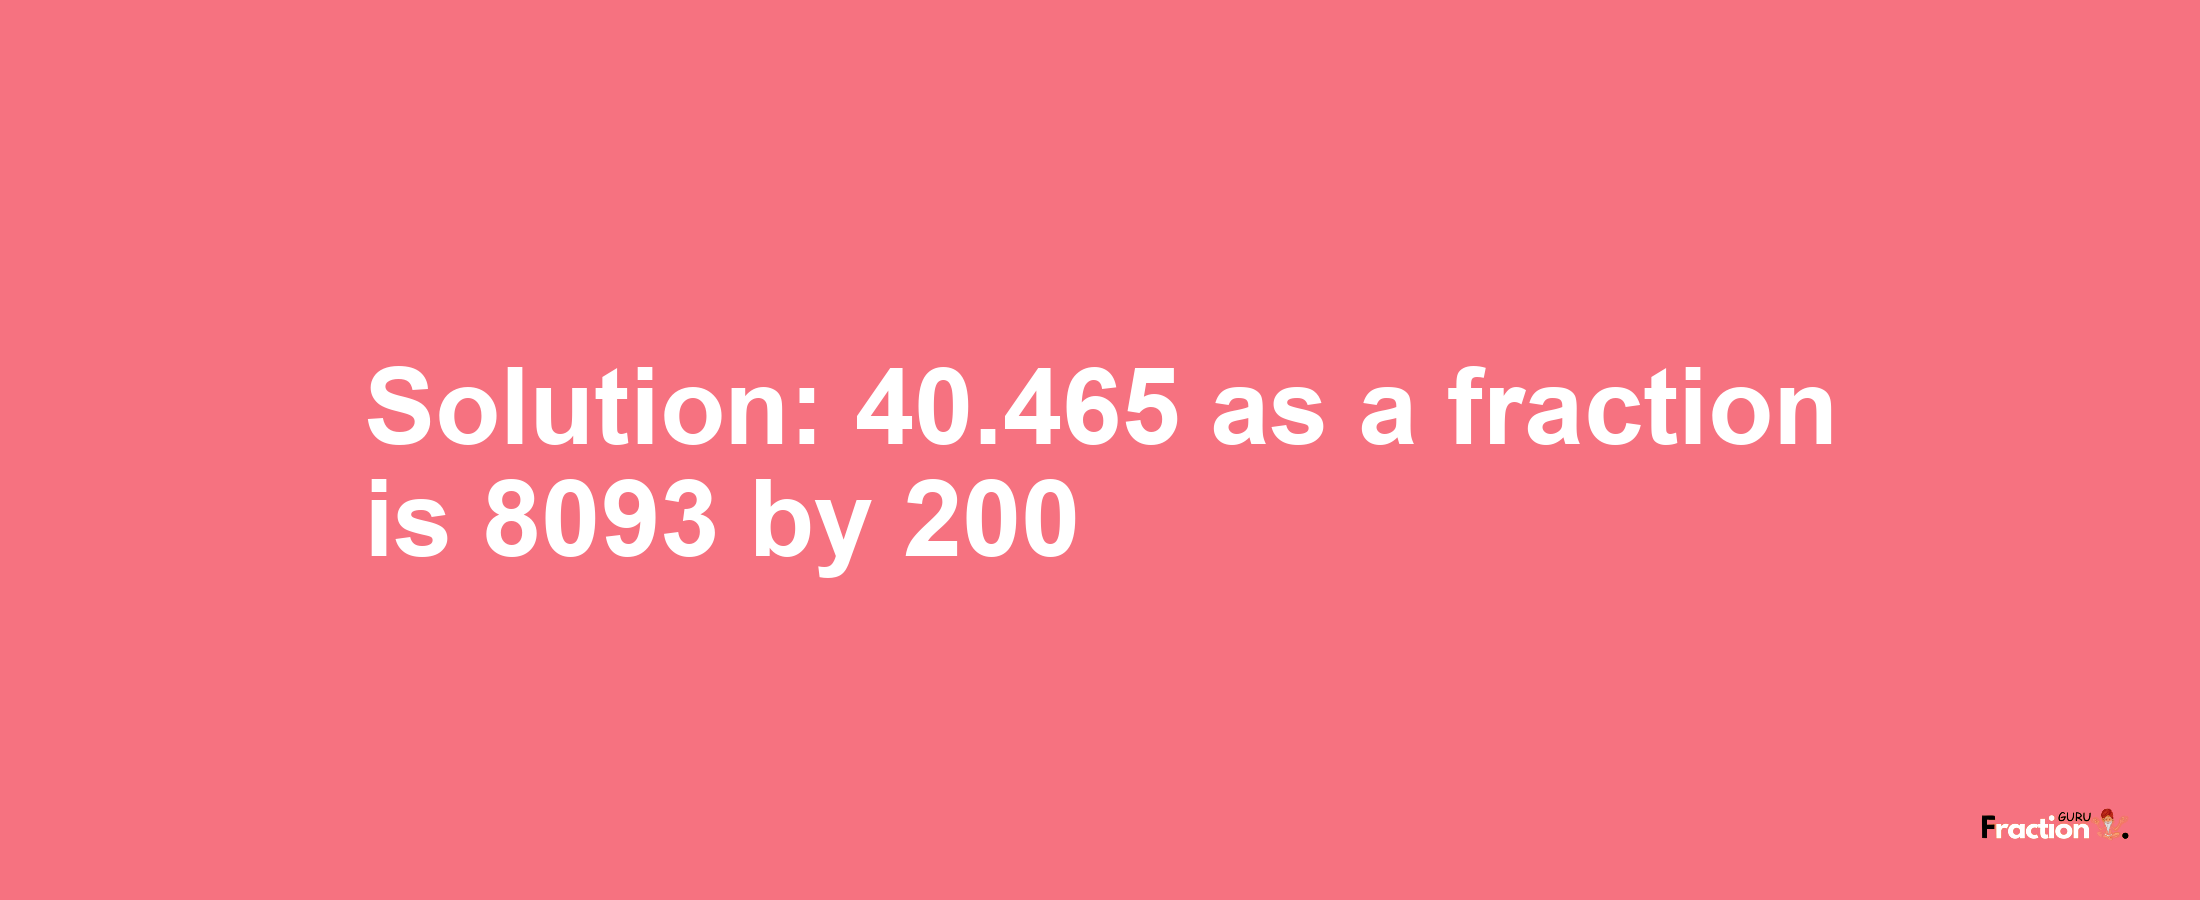 Solution:40.465 as a fraction is 8093/200